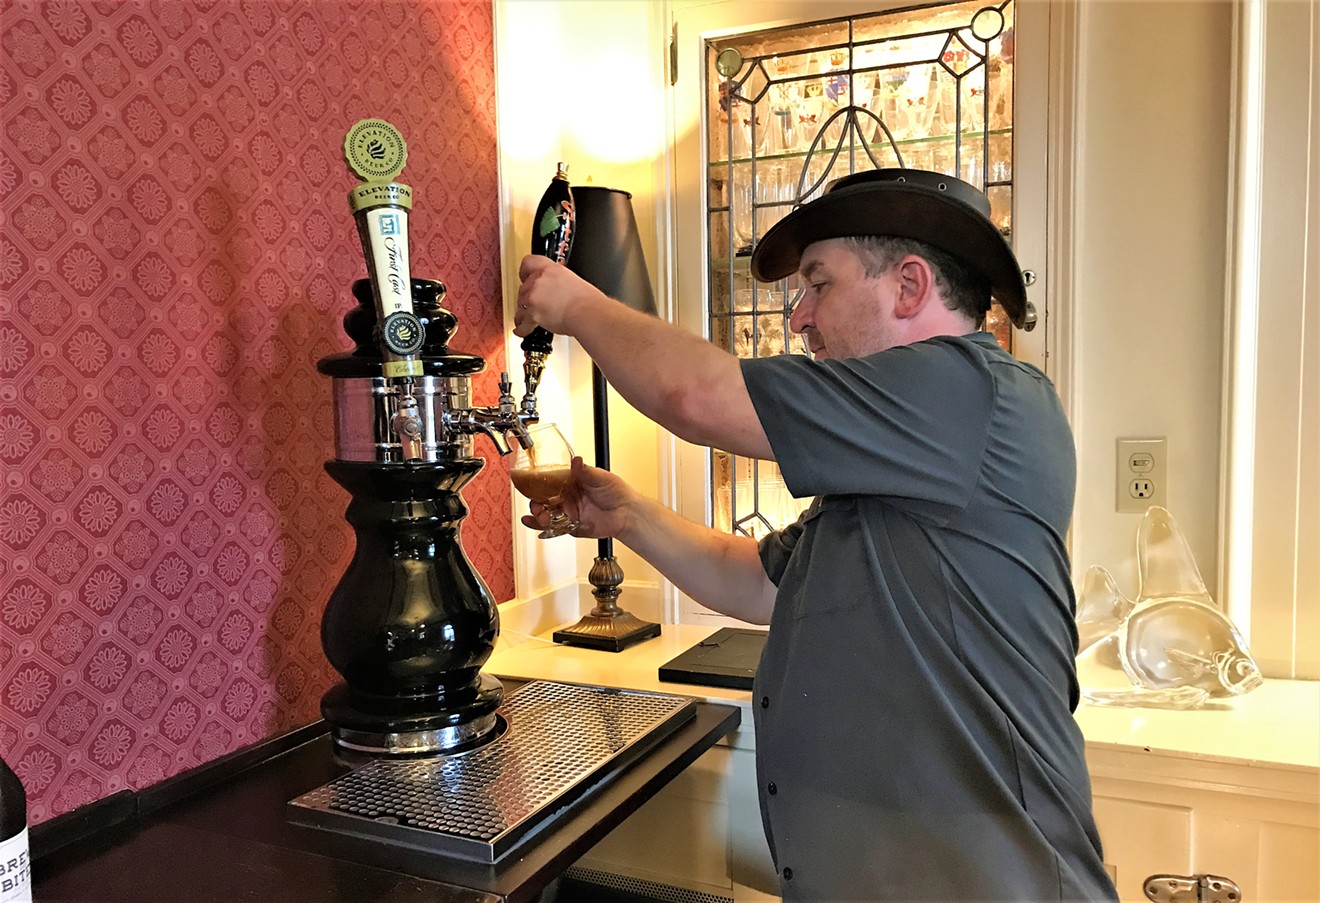 Tim Myers of Strange Craft Beer Company fills a glass at the mansion.